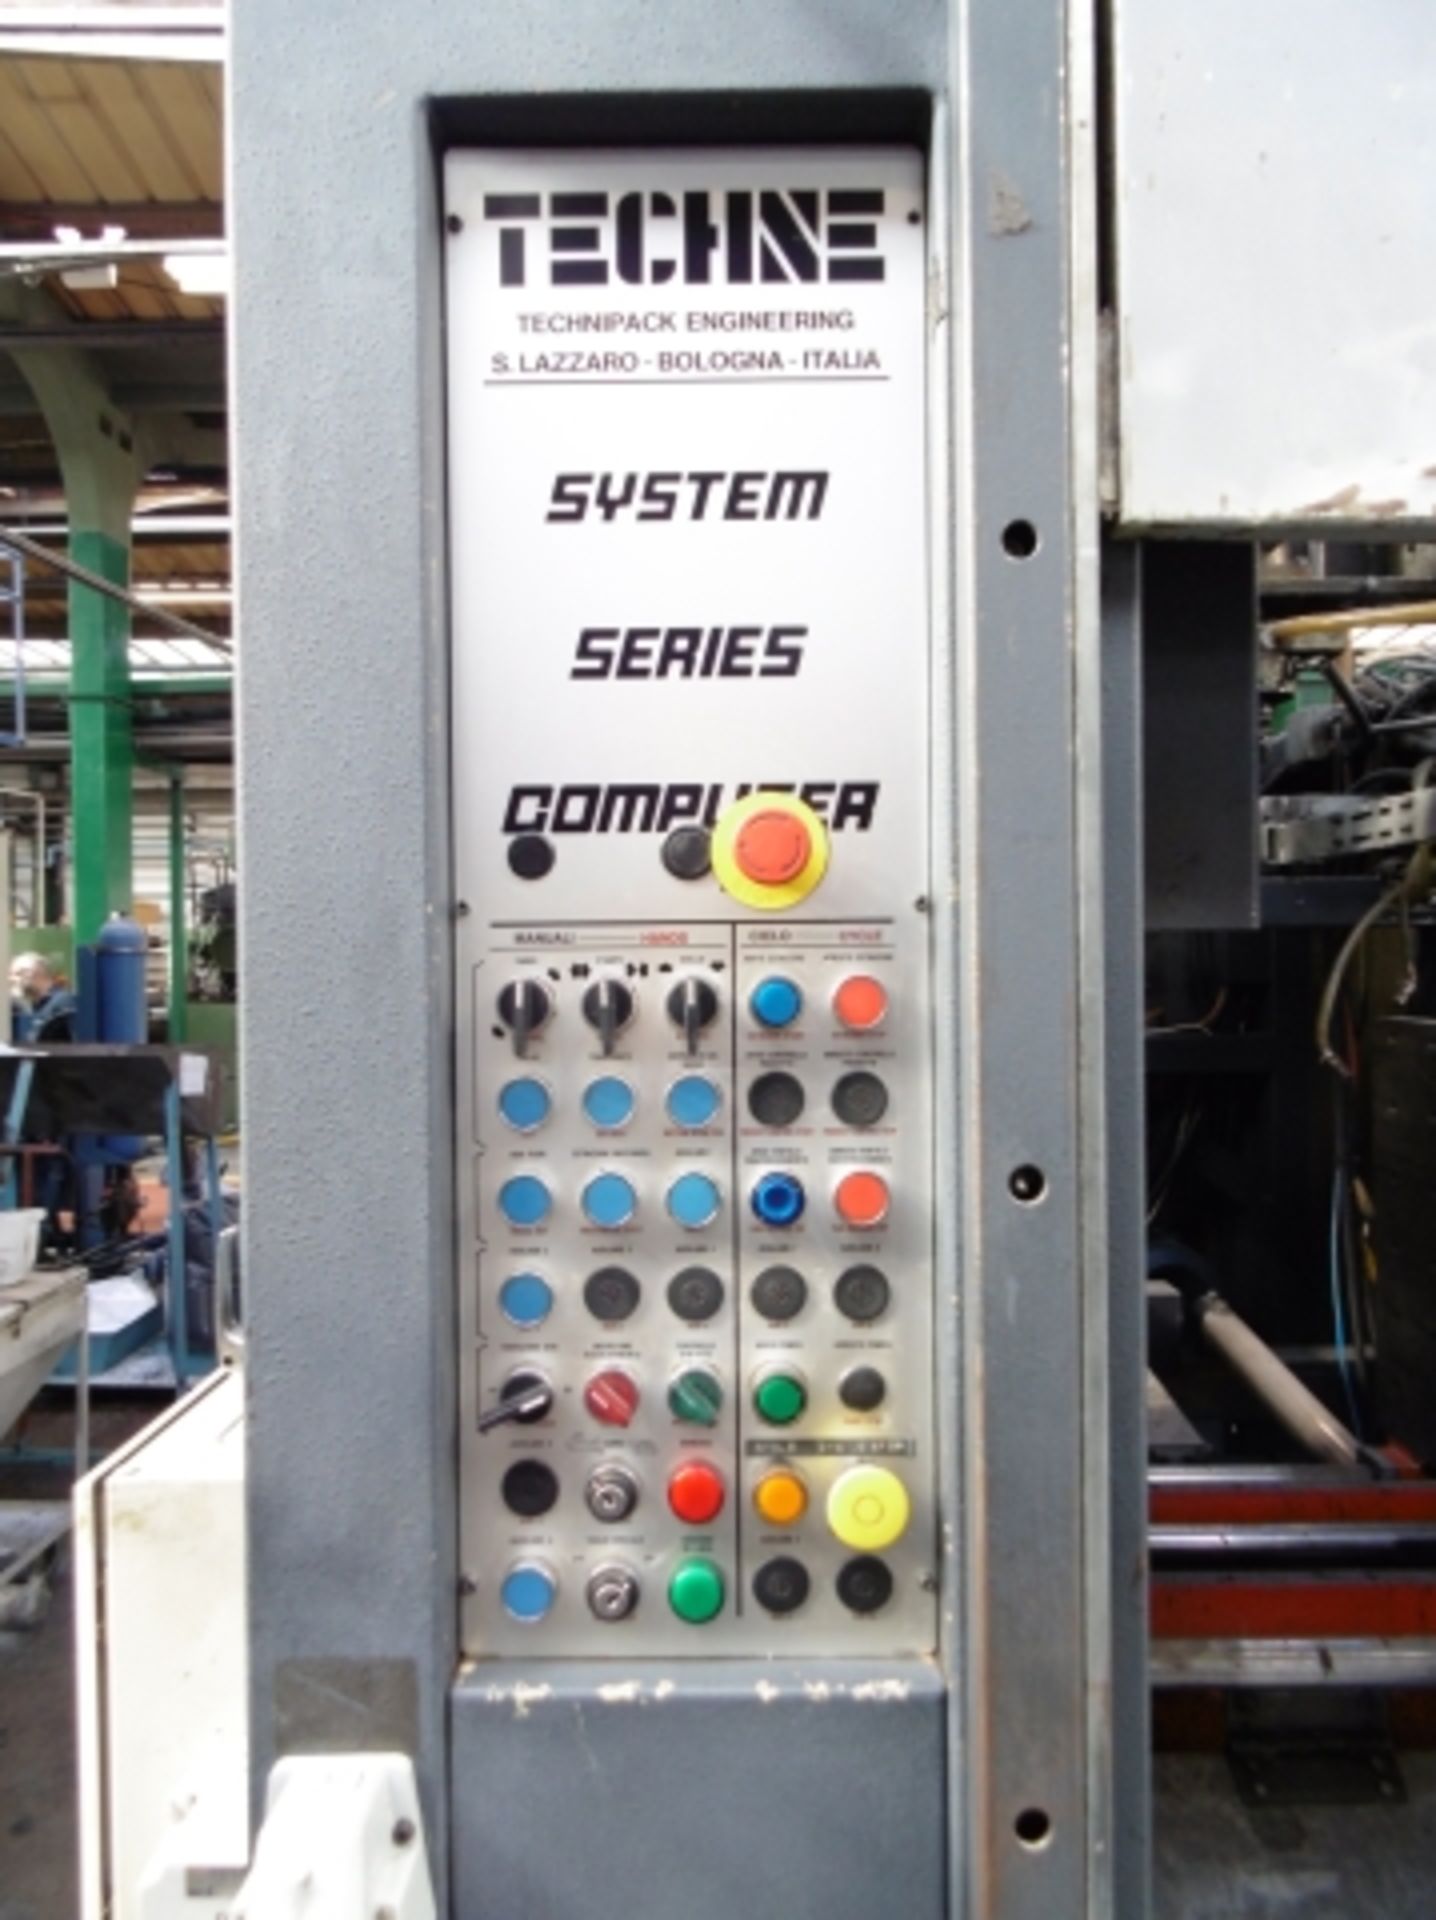 * 1989 TECHNE TYPE 15000 AT BLOW MOULDING MACHINE; WITH SYSTEM SERIES COMPUTER CONTROL; AIR PRESSURE - Image 6 of 19